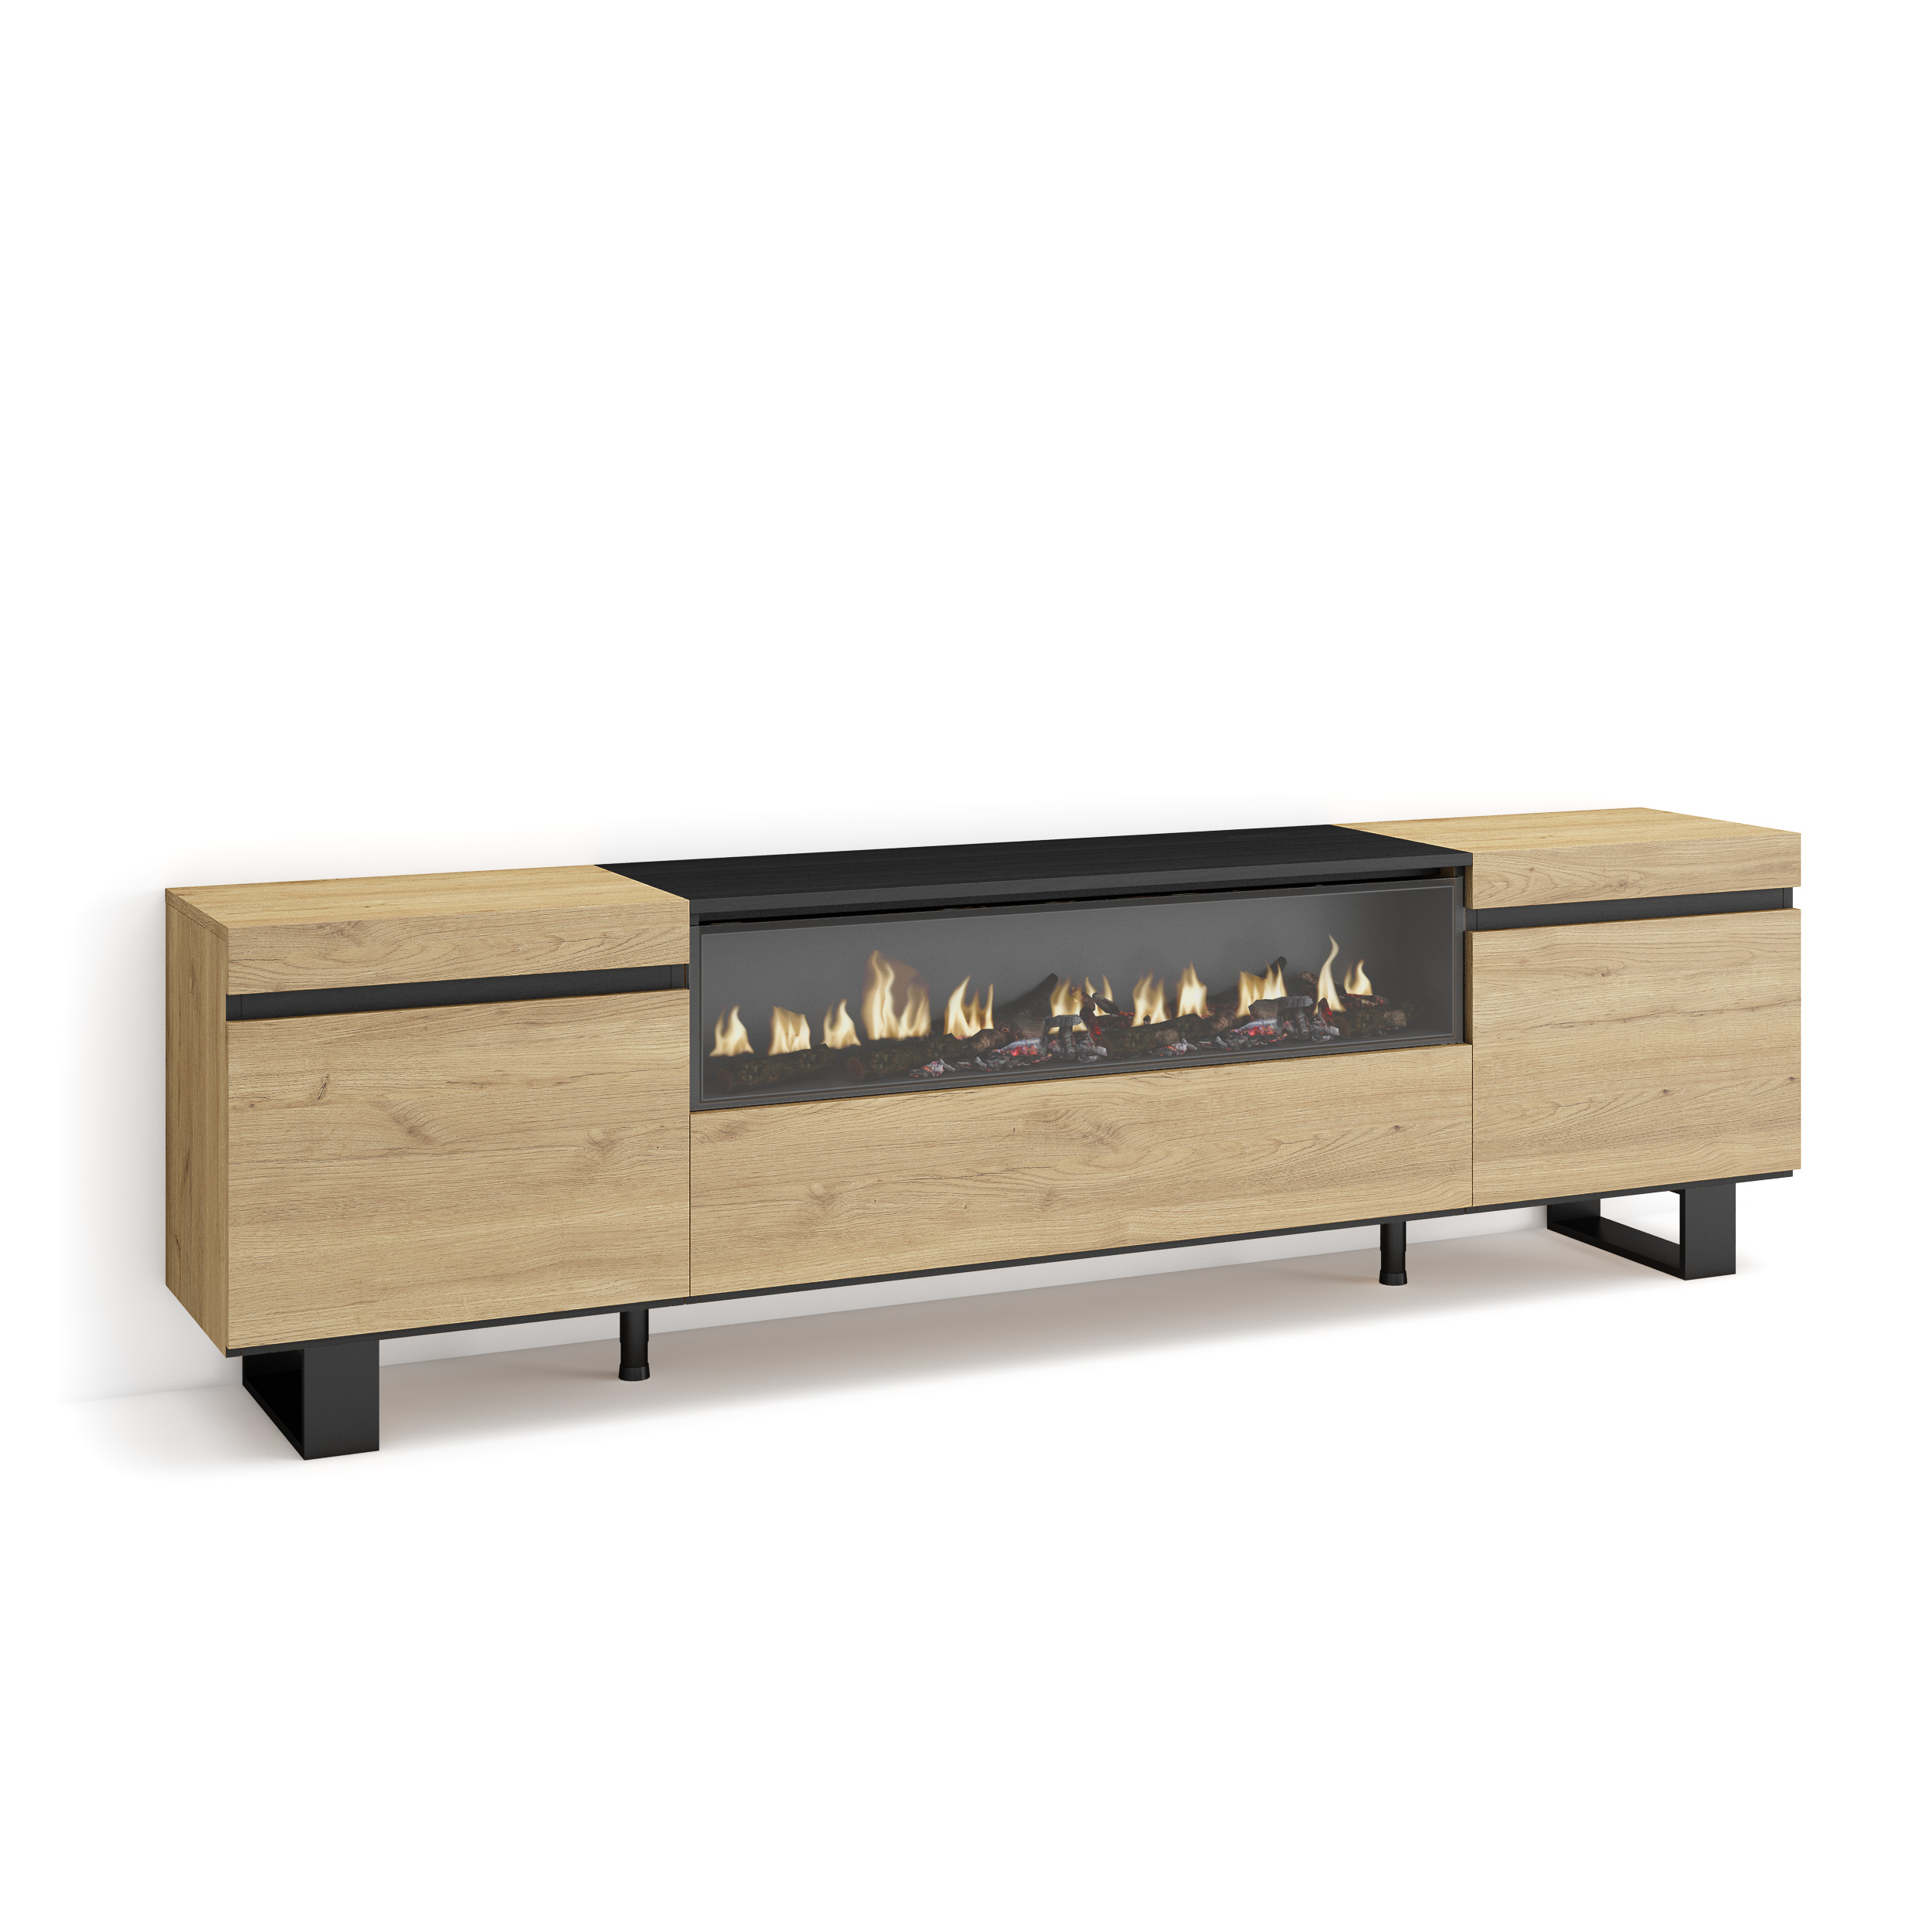 Mueble TV, 200x57x35, Roble, Chimenea eléctrica LED, Tall, Industrial